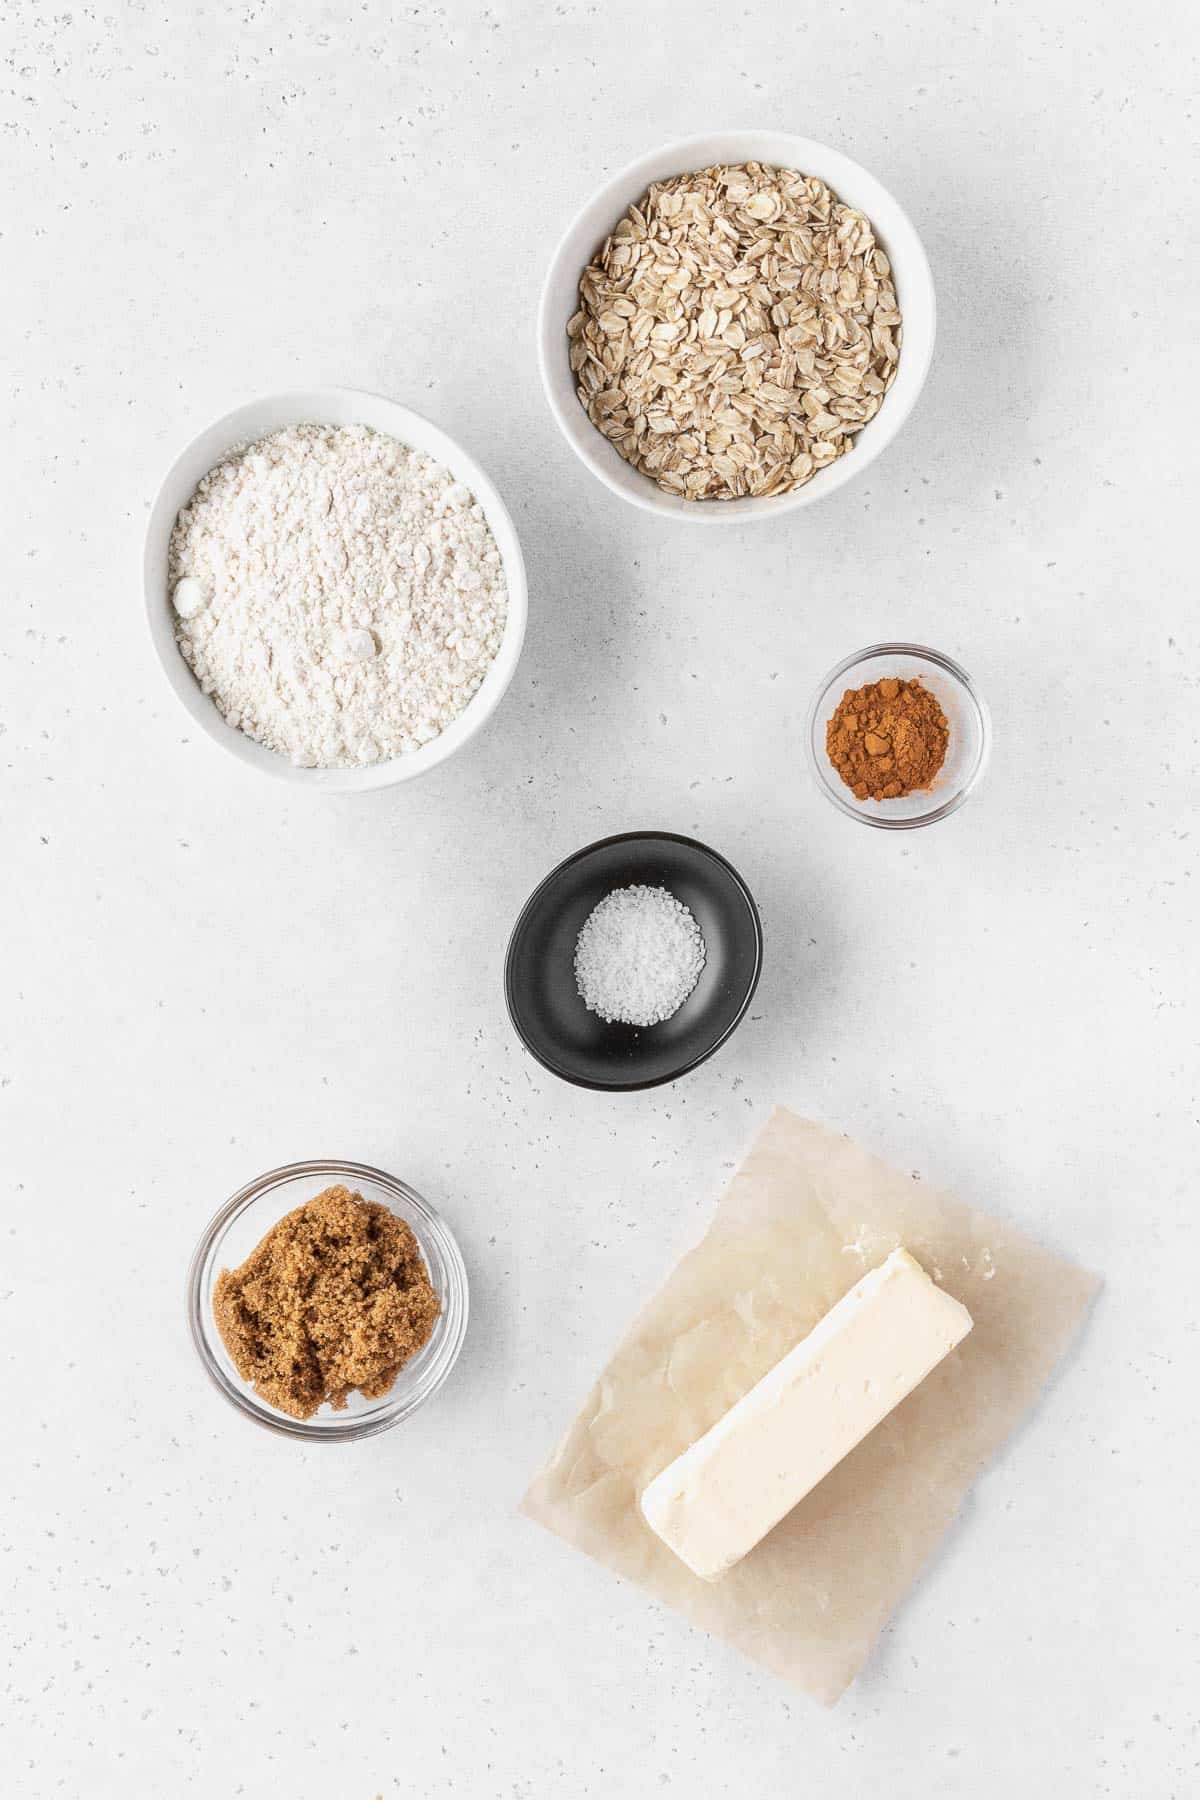 ingredients for making the oatmeal cookie crumble measured out into bowls on a white table.